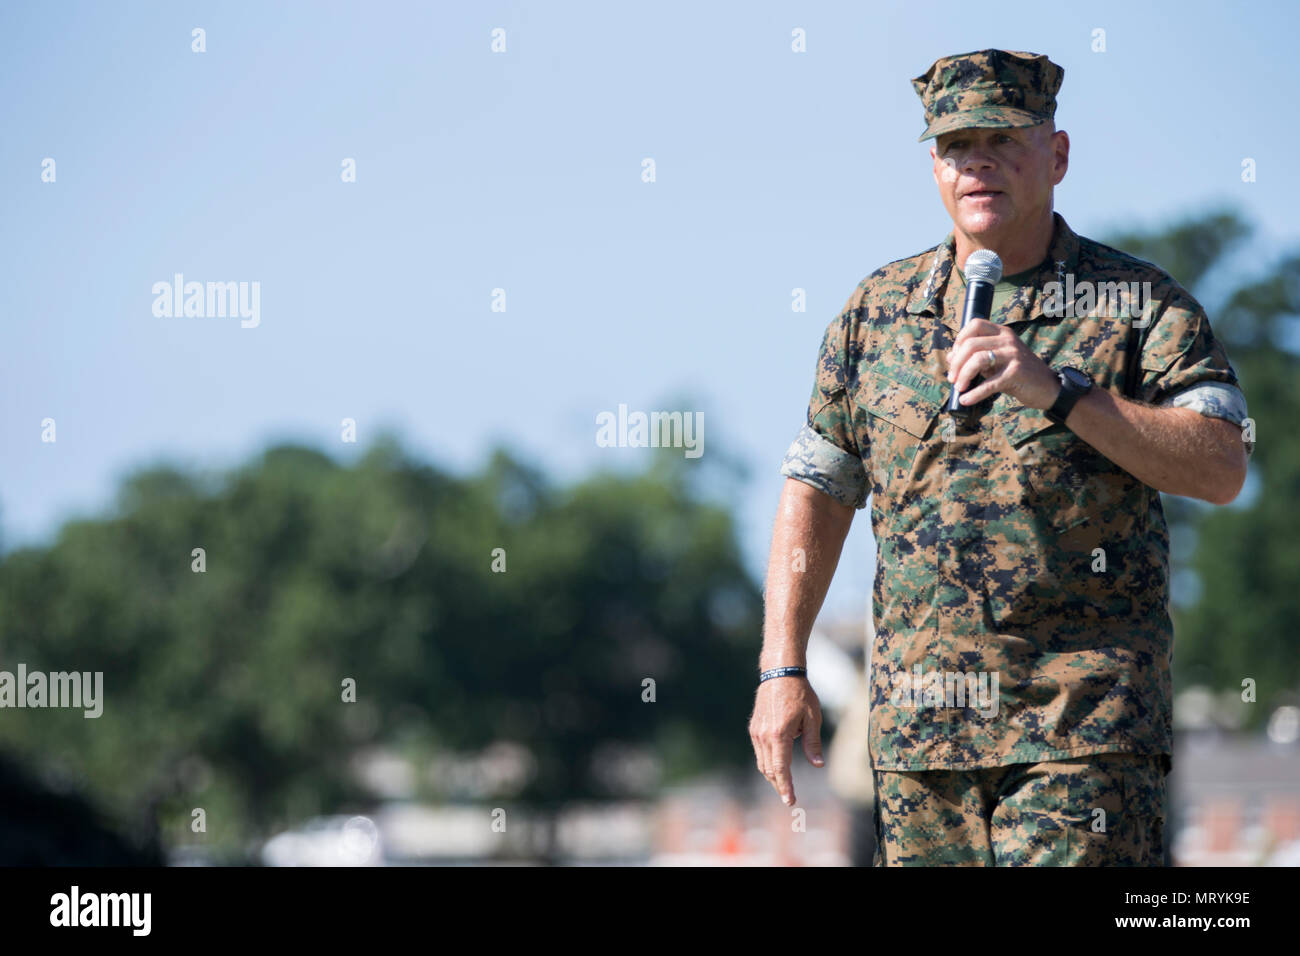 U.S. Marine Corps Gen. Robert B. Neller, commandant of the Marine Corps, speaks to the audience during the II Marine Expeditionary Force (II MEF) change of command ceremony on Camp Lejeune, N.C., July 14, 2017.During the ceremony, Maj. Gen. Walter L. Miller Jr. relinquished his command as commanding general of II MEF to Lt. Gen. Robert F. Hedelund. (U.S. Marine Corps photo by Lance Cpl. Koby I. Saunders) Stock Photo